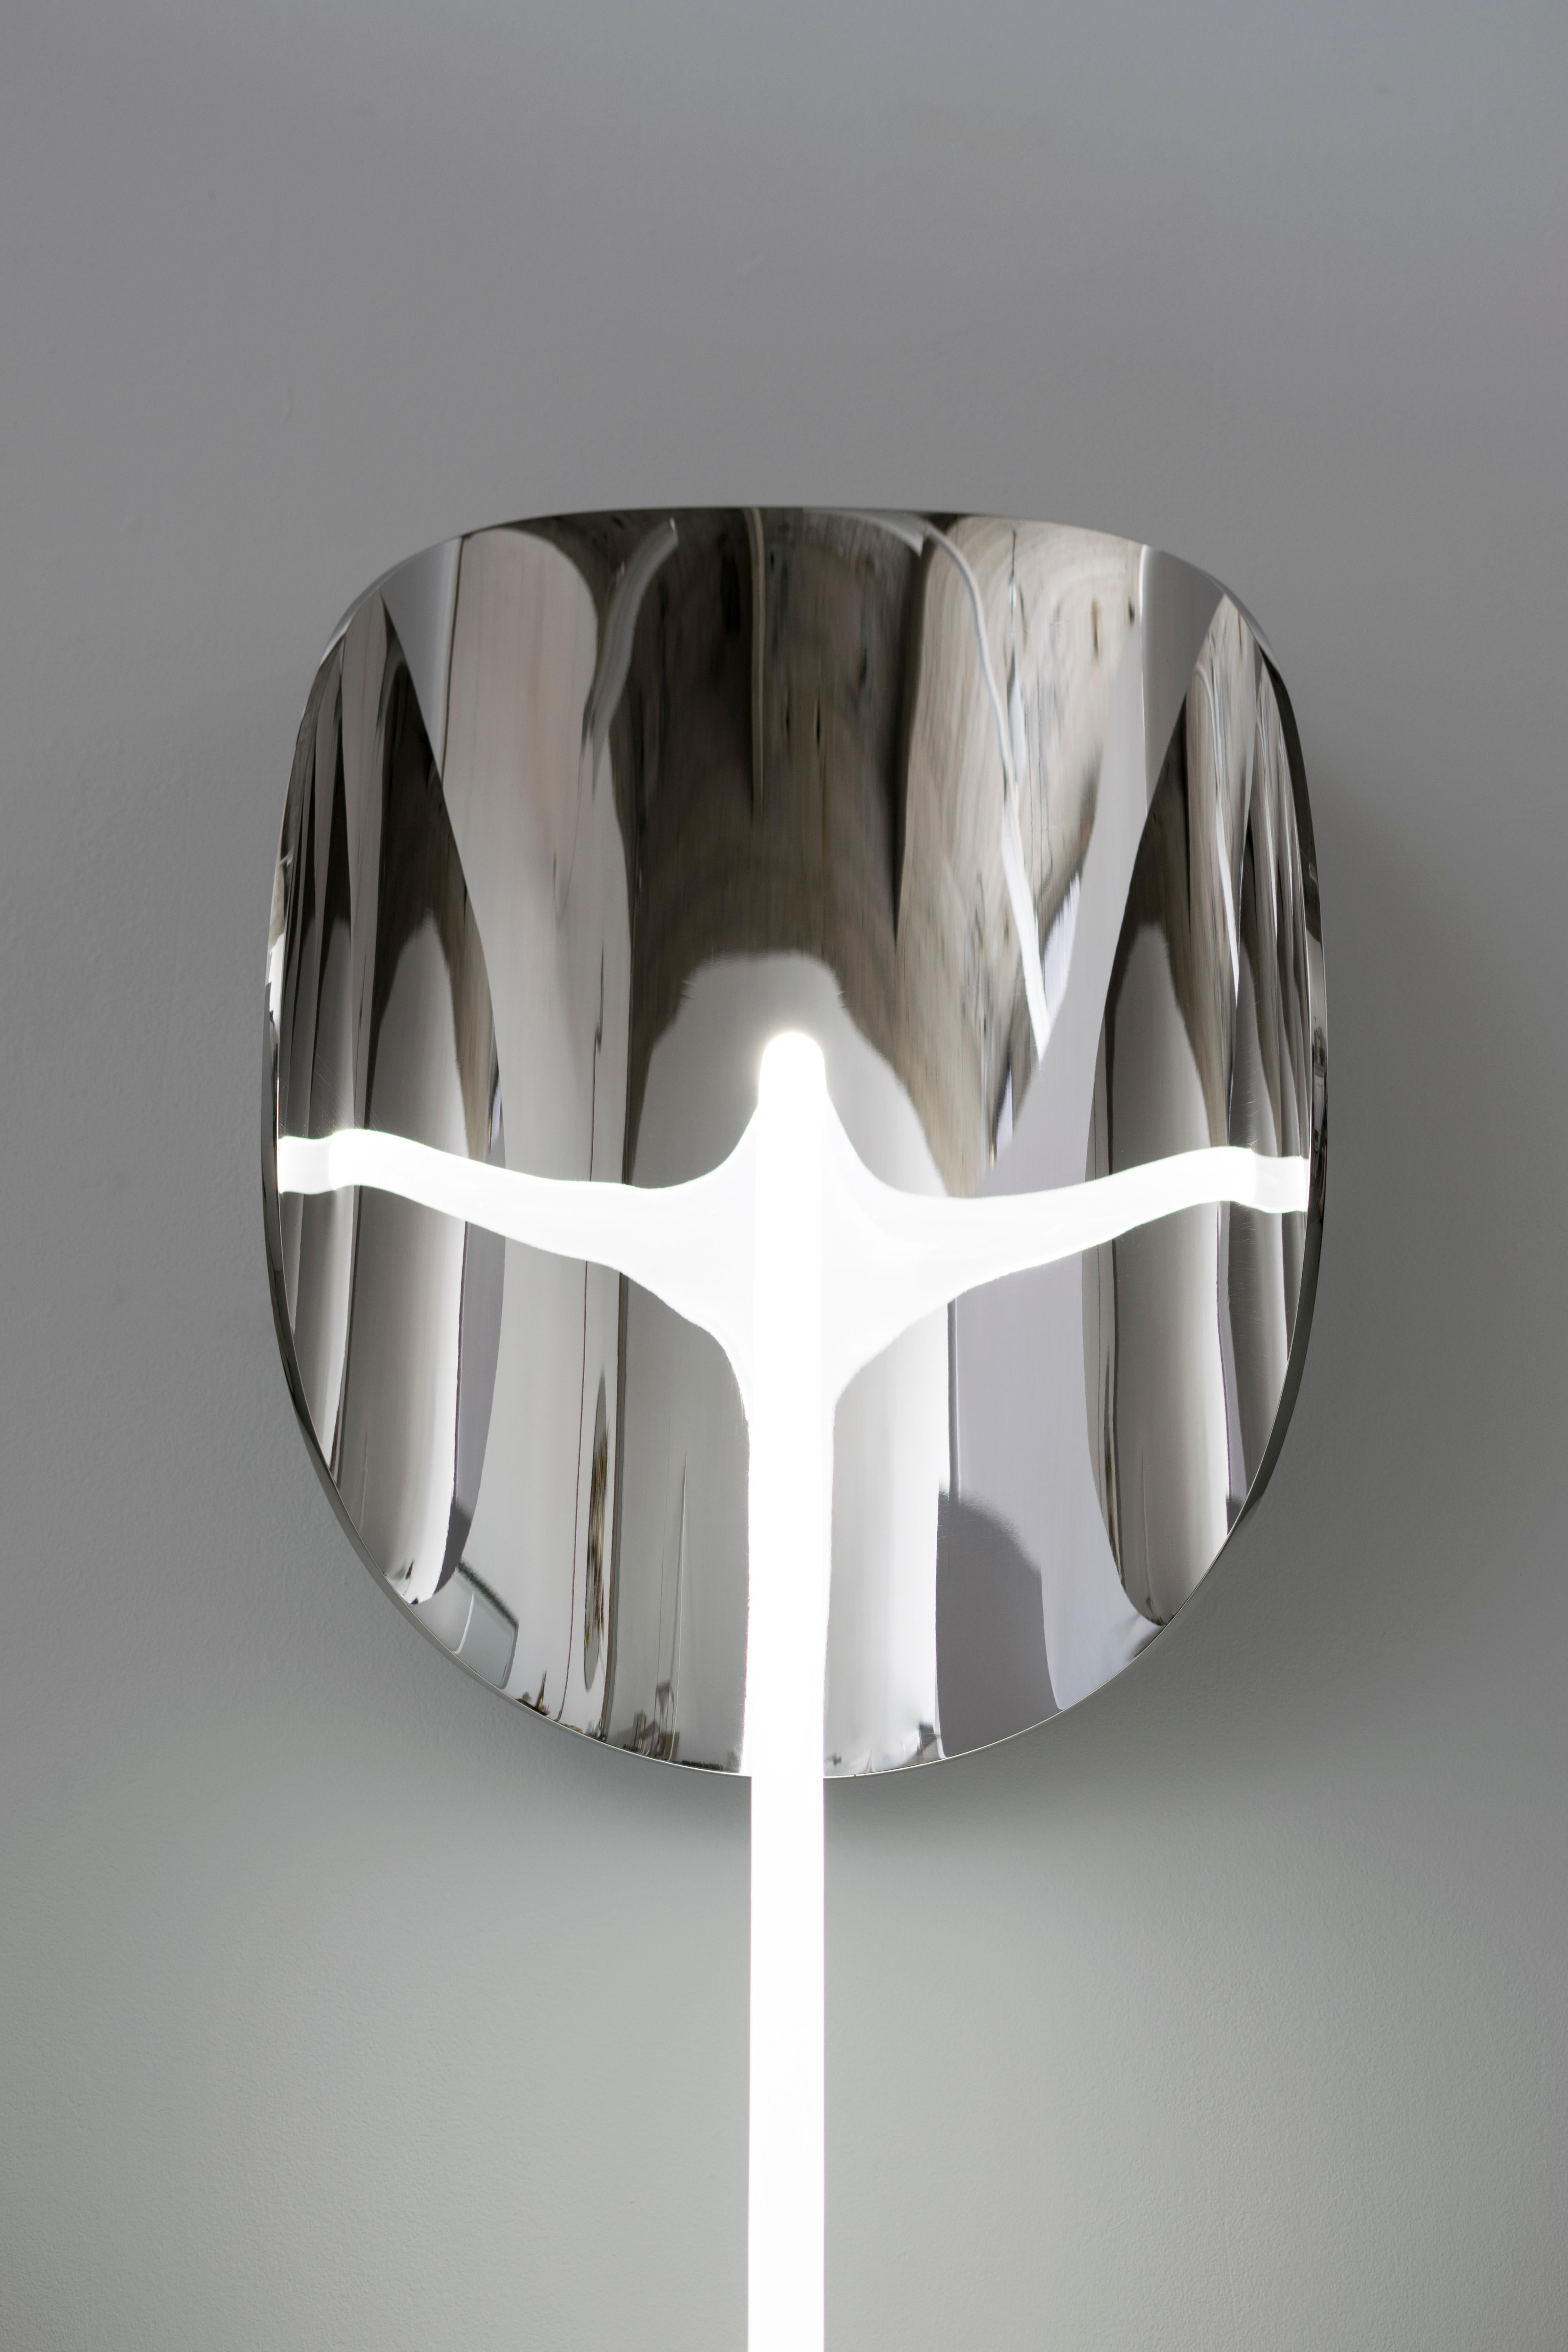 Stainless Steel Elusive Nature of Perception No. 07 Mirror by Maximilian Michaelis For Sale